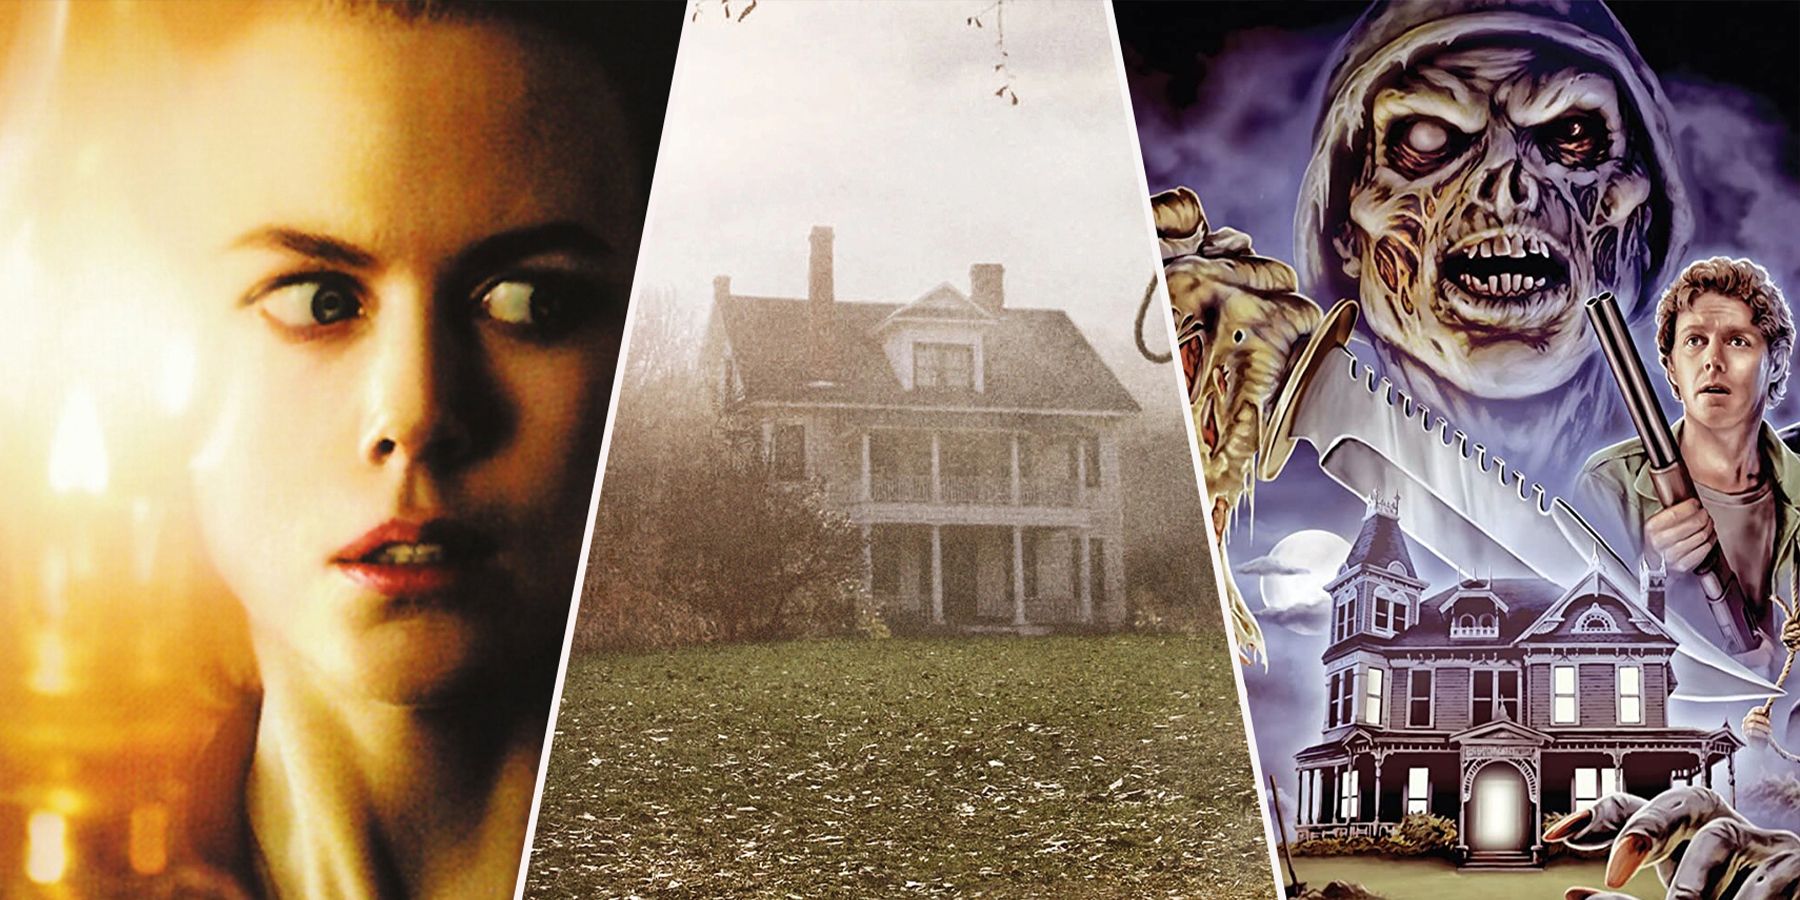 15 Best Haunted House Movies of All Time